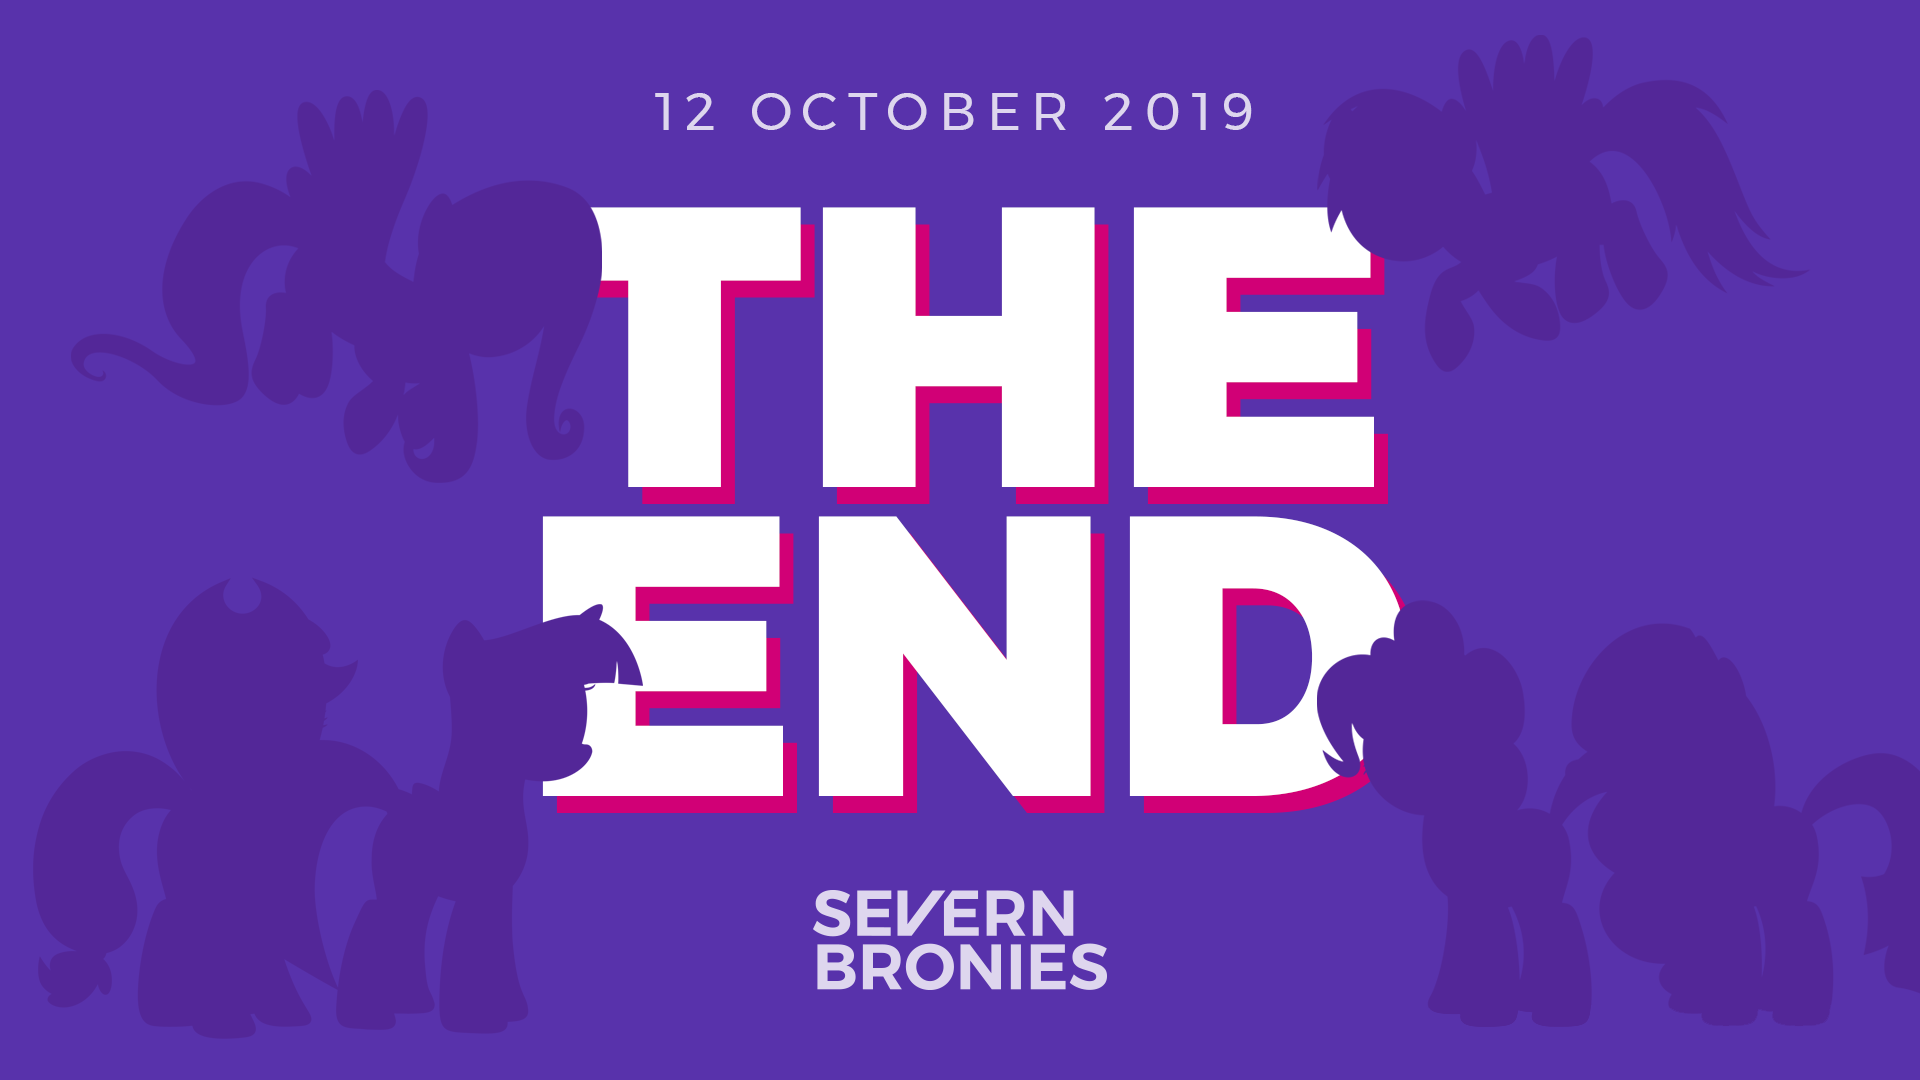 Large words stating "The End. 12 October 2019." surrounded by silhouettes of the Mane Six.